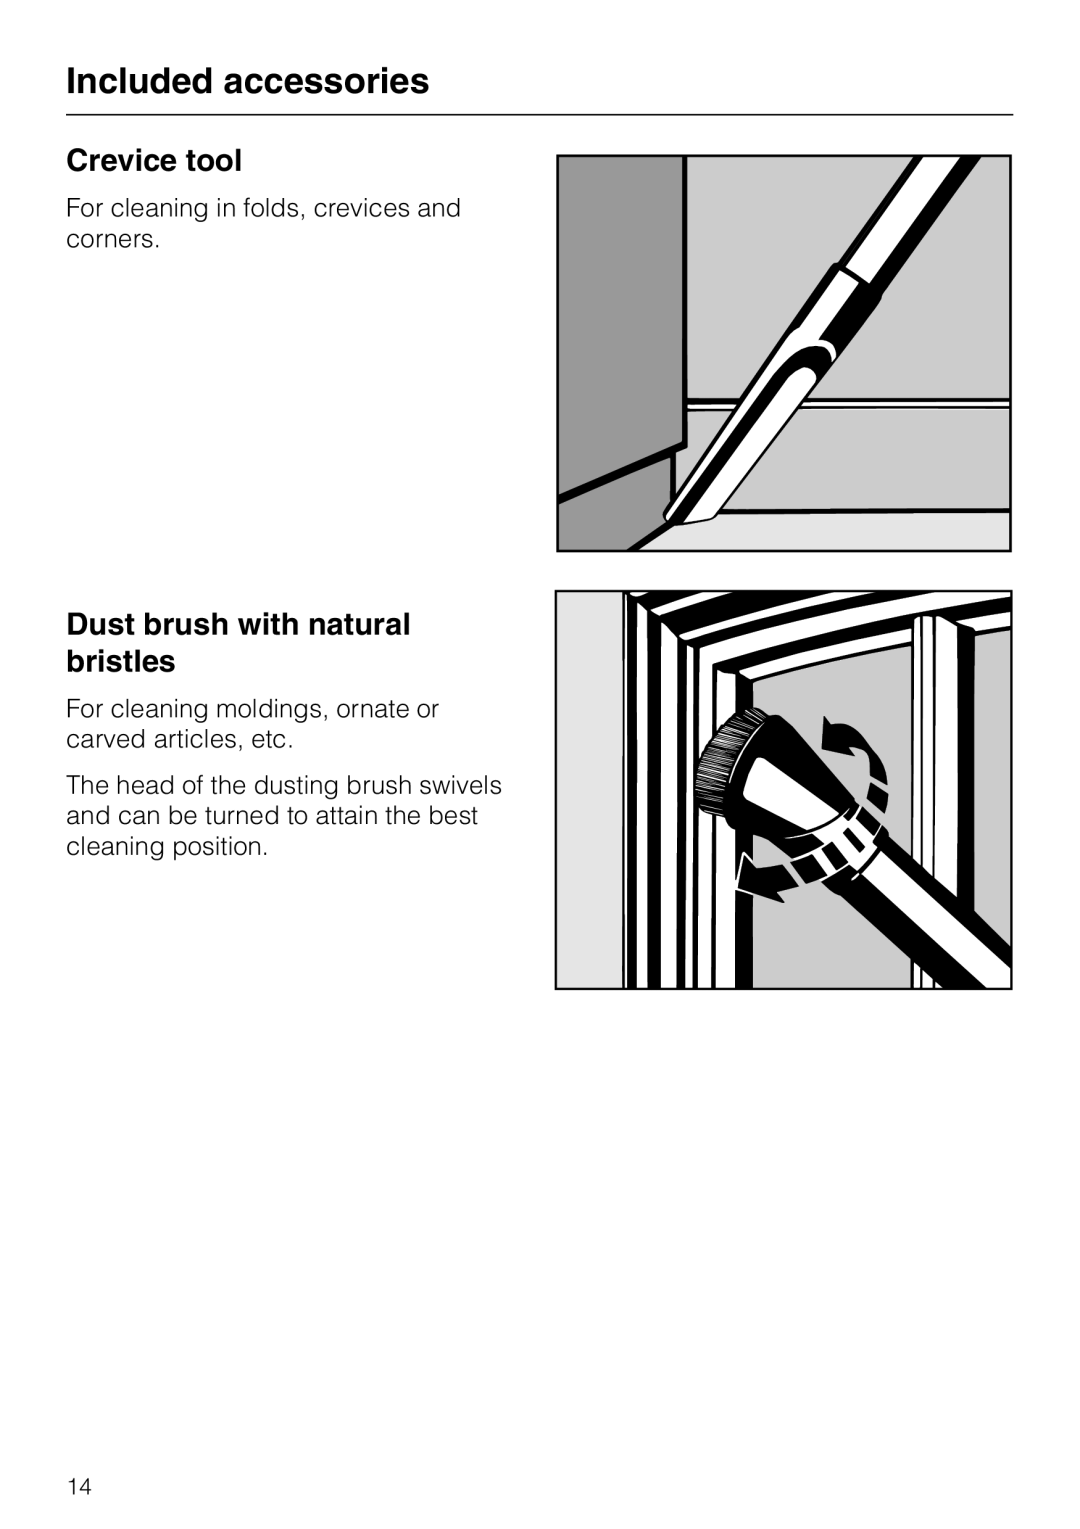 Miele S 5000 operating instructions Crevice tool, Dust brush with natural bristles, Included accessories 